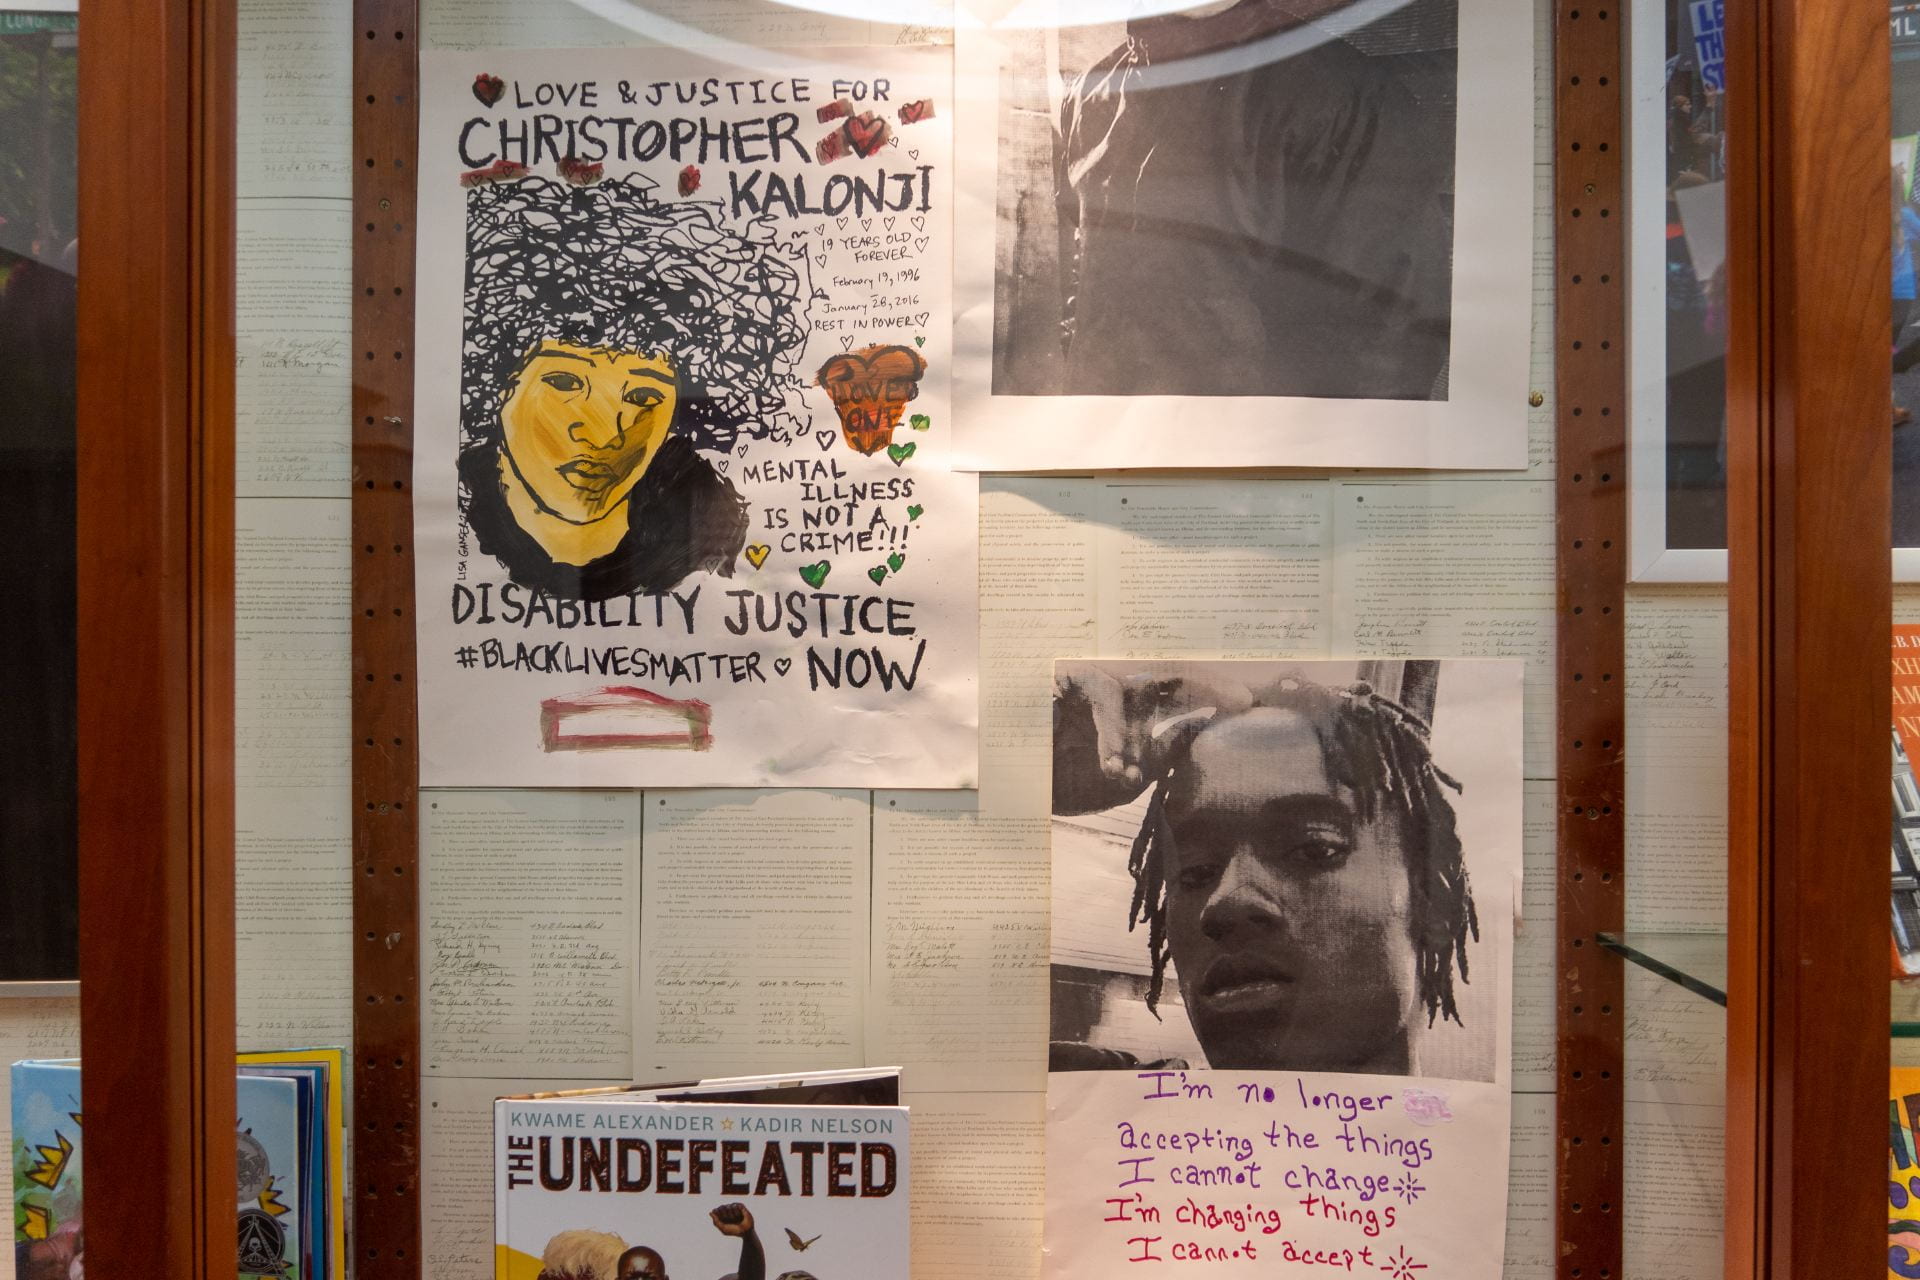 Case exhibiting Community Art projects, specifically honoring young Black Lives lost due to social injustice and inequity